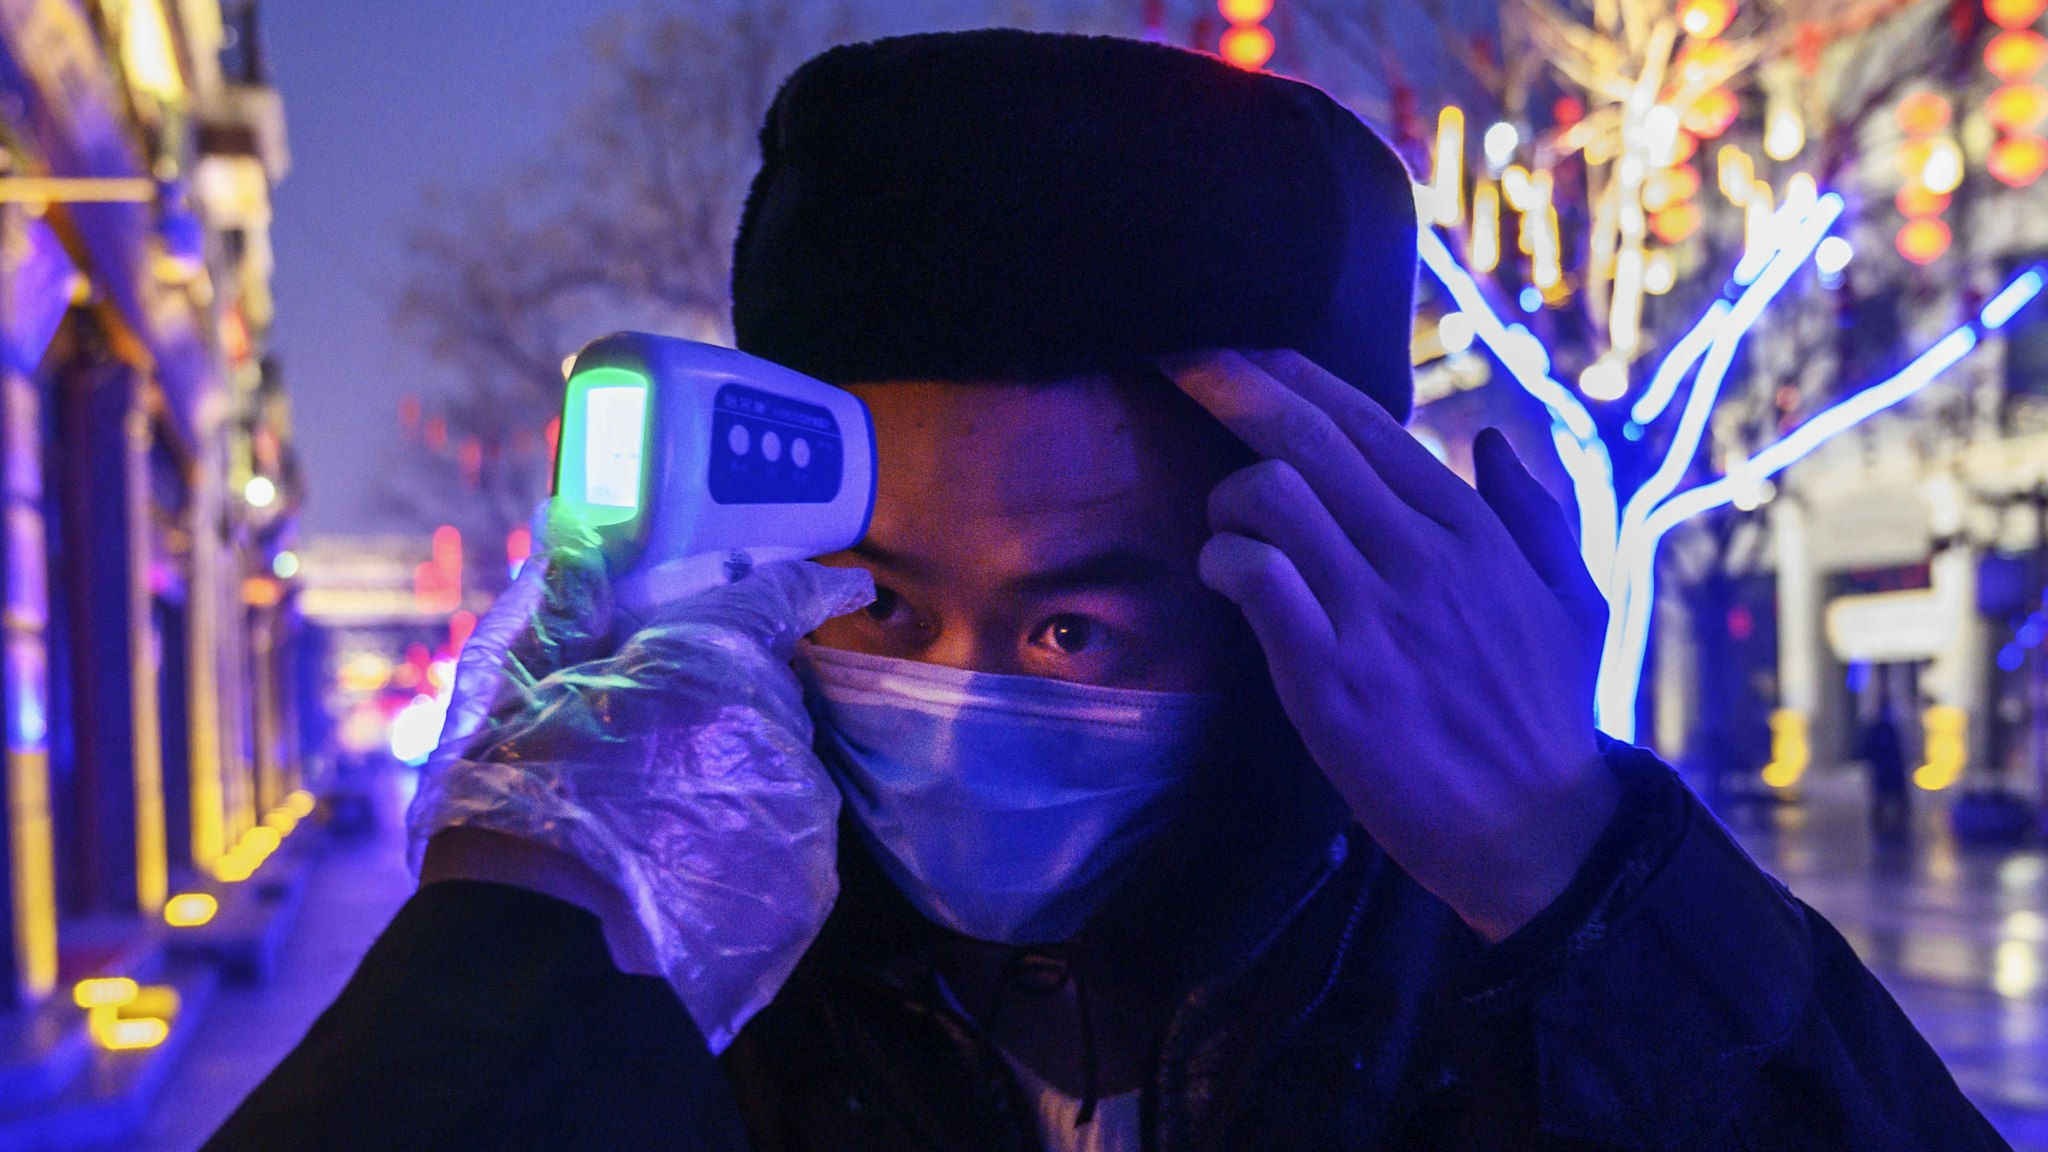 BEIJING, CHINA - FEBRUARY 12: A Chinese worker wears a protective mask as he has his temperature checked in a nearly empty and shuttered commercial street on February 12, 2020 in Beijing, China. The number of cases of a deadly new coronavirus rose to more than 44000 in mainland China Wednesday, days after the World Health Organization (WHO) declared the outbreak a global public health emergency. China continued to lock down the city of Wuhan in an effort to contain the spread of the pneumonia-like disease which medicals experts have confirmed can be passed from human to human. In an unprecedented move, Chinese authorities have put travel restrictions on the city which is the epicentre of the virus and municipalities in other parts of the country affecting tens of millions of people. The number of those who have died from the virus in China climbed to over 1100 on Wednesday, mostly in Hubei province, and cases have been reported in other countries including the United States, Canada, Australia, Japan, South Korea, India, the United Kingdom, Germany, France and several others. The World Health Organization has warned all governments to be on alert and screening has been stepped up at airports around the world. Some countries, including the United States, have put restrictions on Chinese travellers entering and advised their citizens against travel to China.